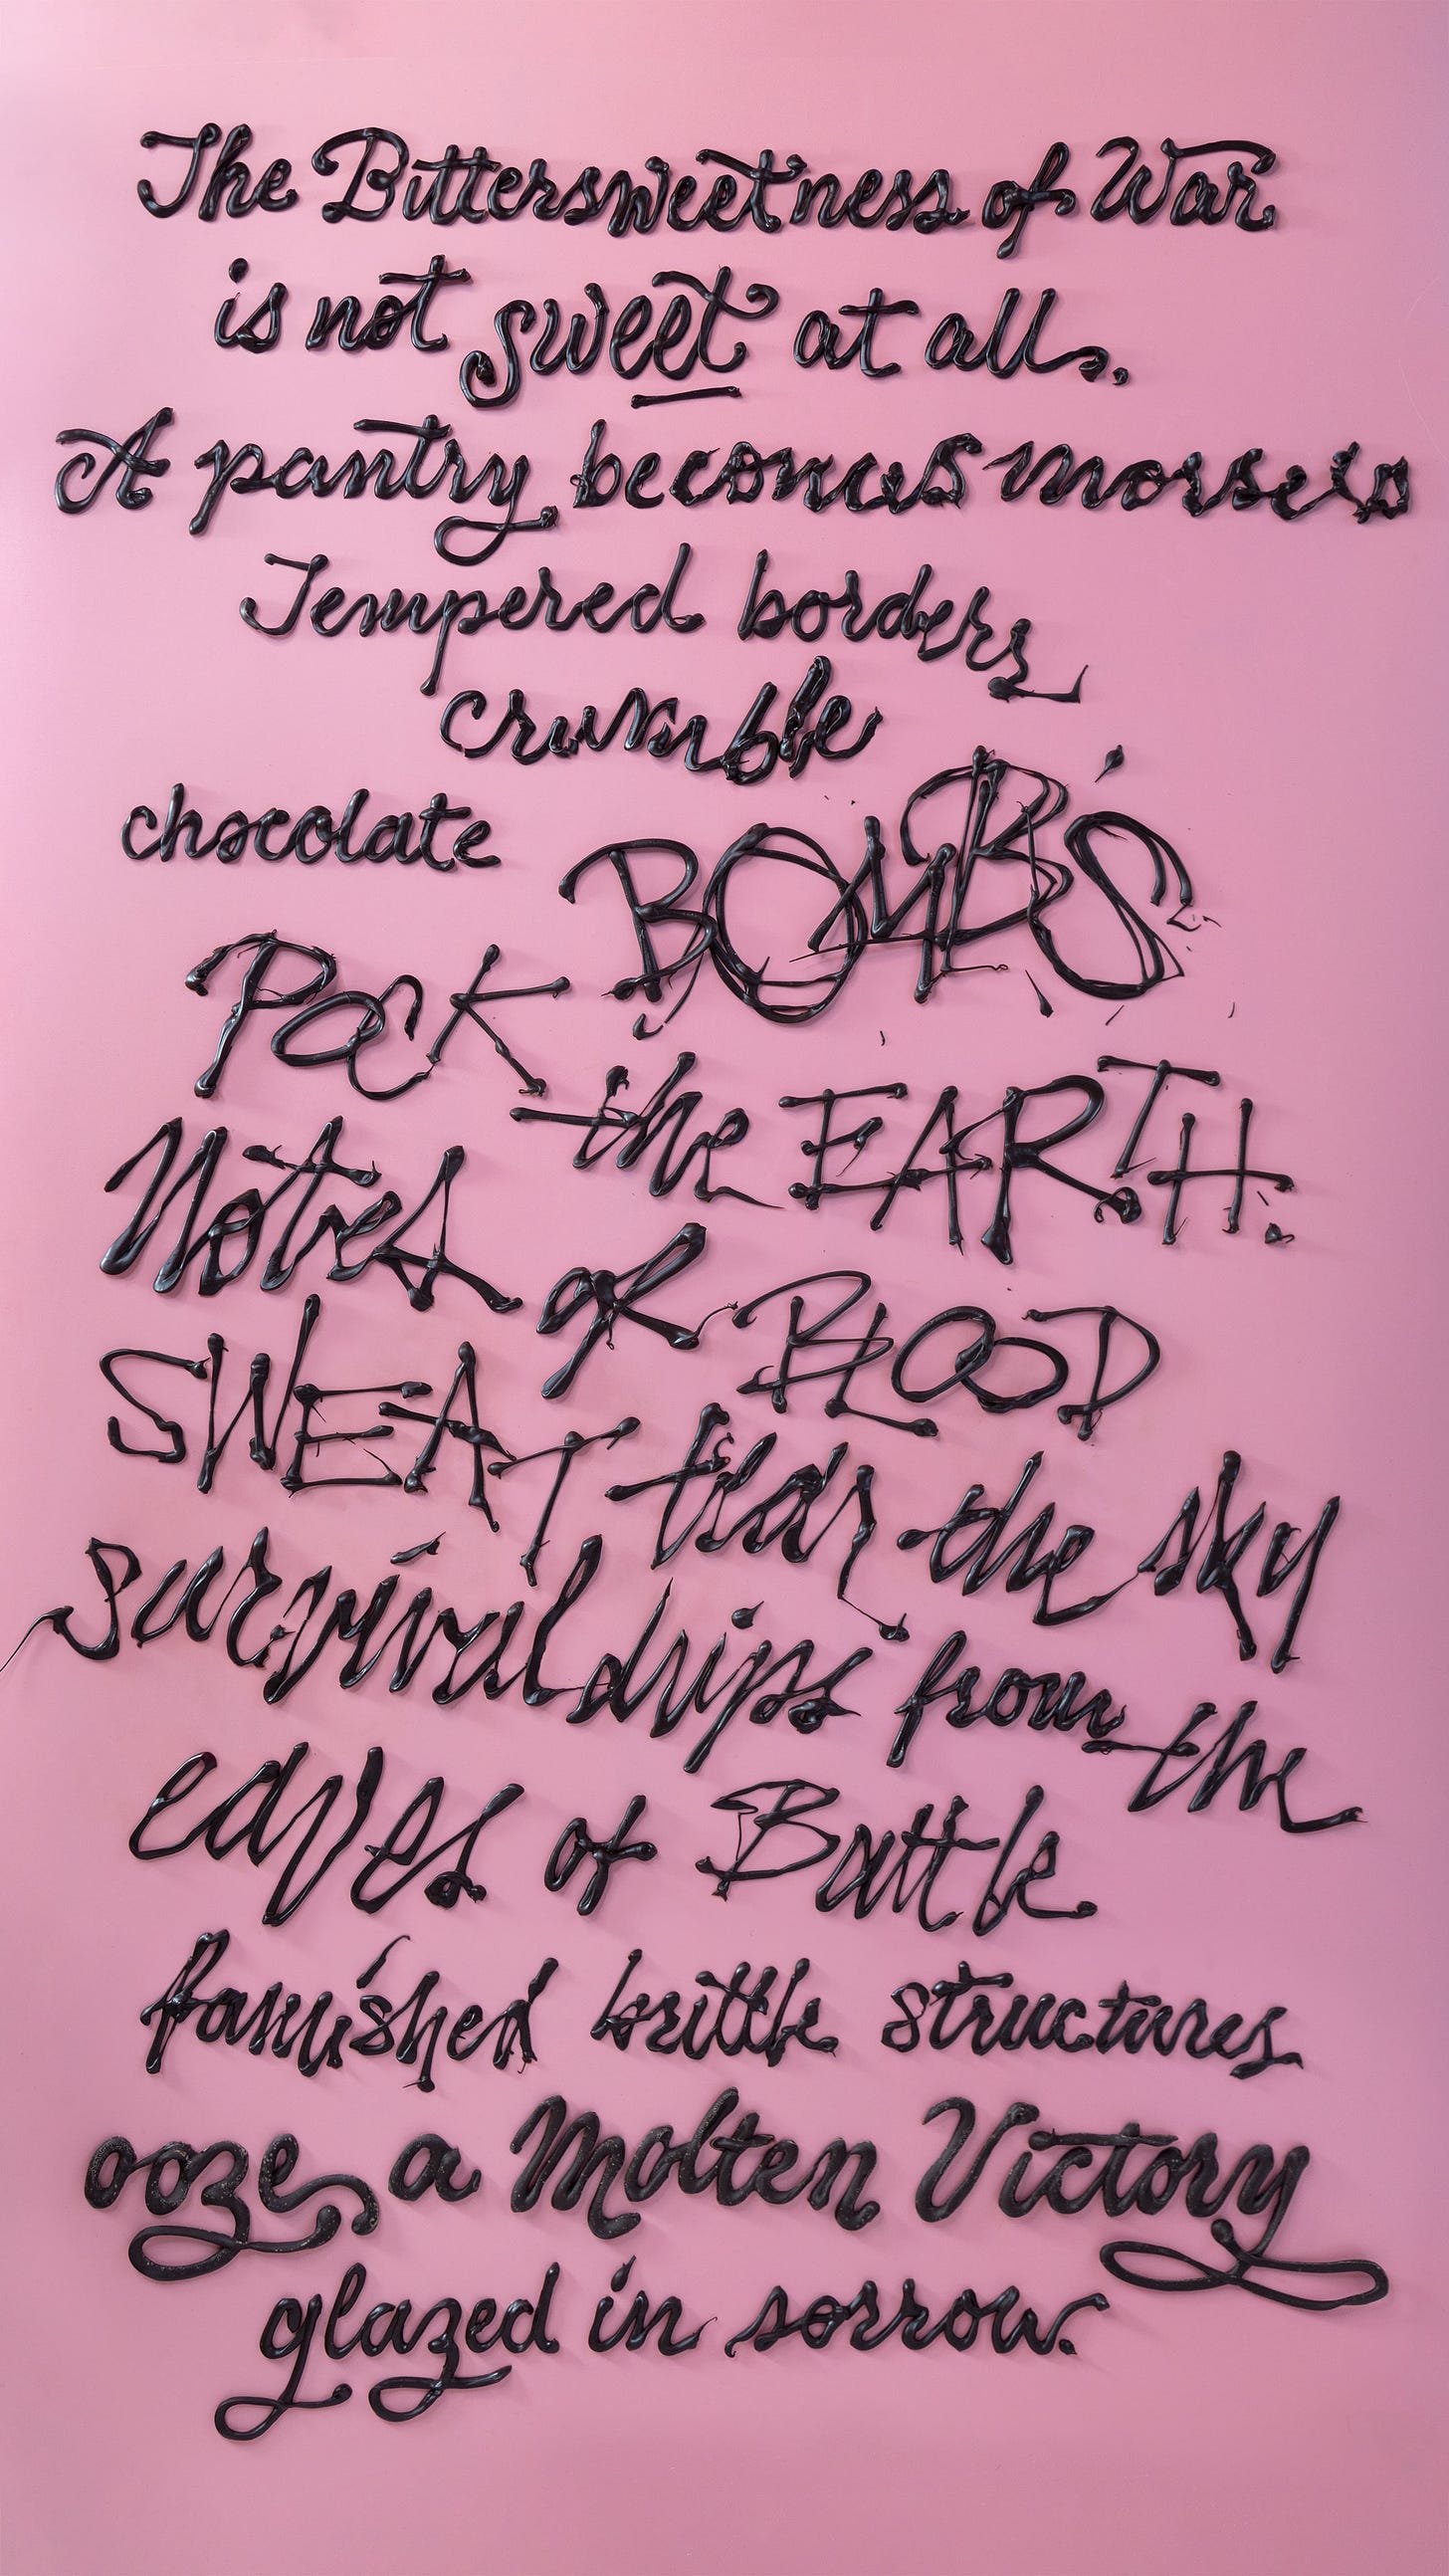 Chocolate words are piped onto a smooth background. In the top right corner is parchment paper with leftover letters and a pair of scissors. It says "The Bittersweetness of War / is not sweet at all. / A pantry becomes morsels / tempered borders crumble / chocolate BOMBS / POCK the EARTH / Notes of BLOOD / SWEAT / tear the sky / survival drips from the / eaves of BATTLE / famished brittle structures / ooze a Molten Victory / glazed in sorrow."